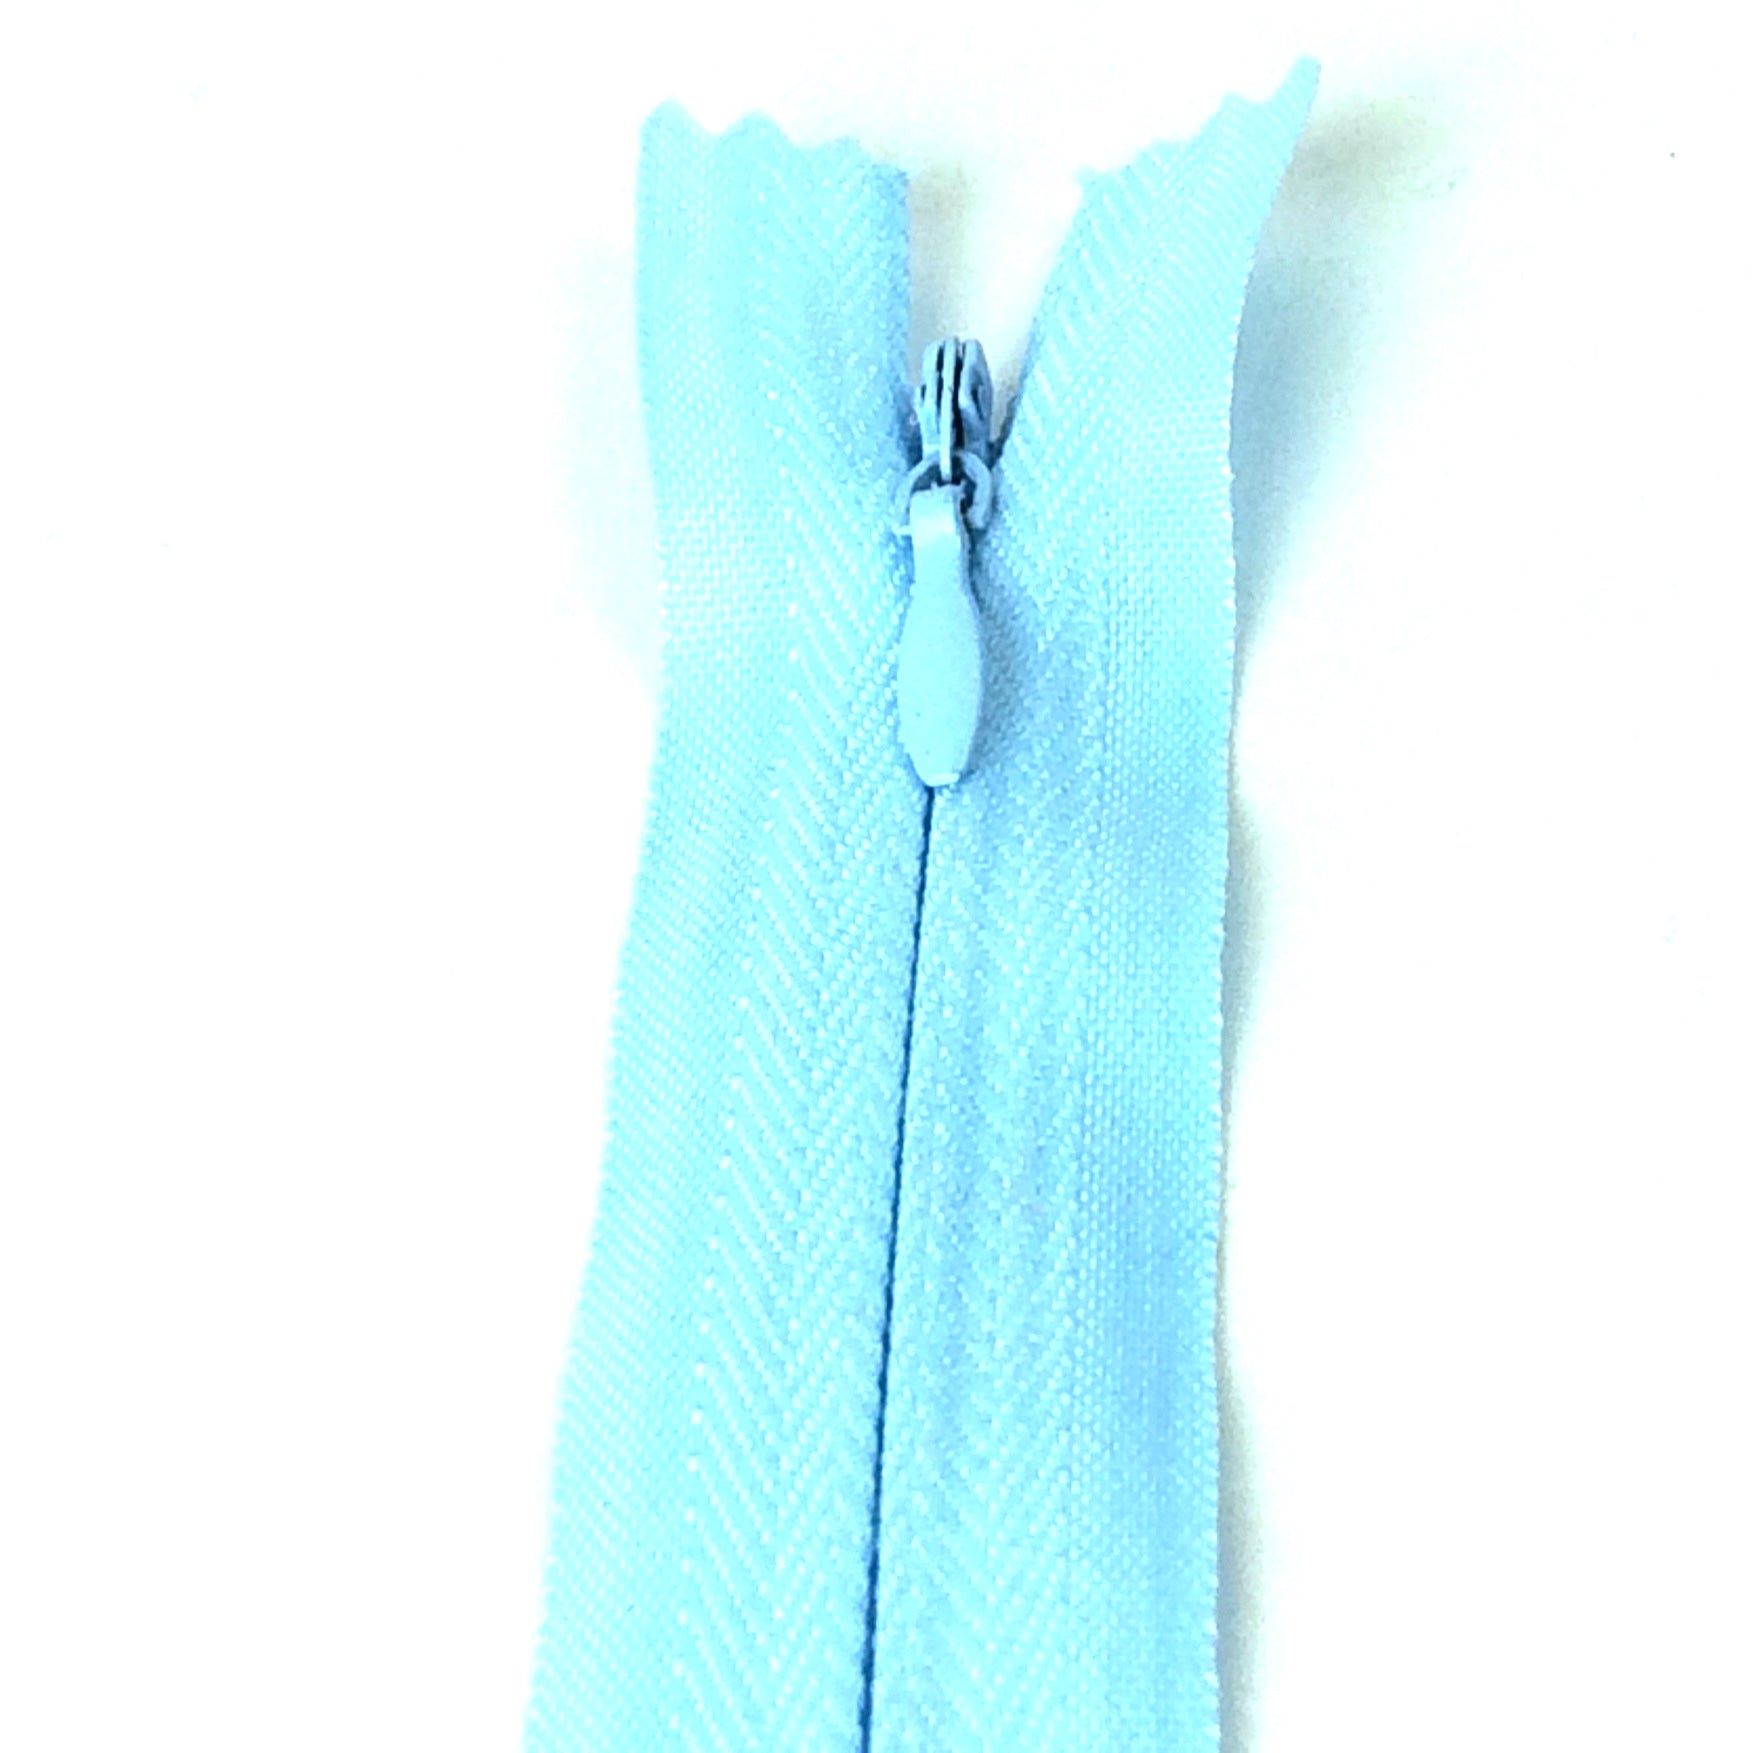 Photo of light blue invisible or concealed zips available in many different colours and sizes. Great for achieving a professional finish in your products. Invisible zippers are perfect for dressmaking, cushions, crafts, etc., where you don't want your zipper showing. Installing them can be tricky without the right foot on your machine; a normal zipper foot is for installing standard zippers, while you will need an invisible zipper foot for a professional result